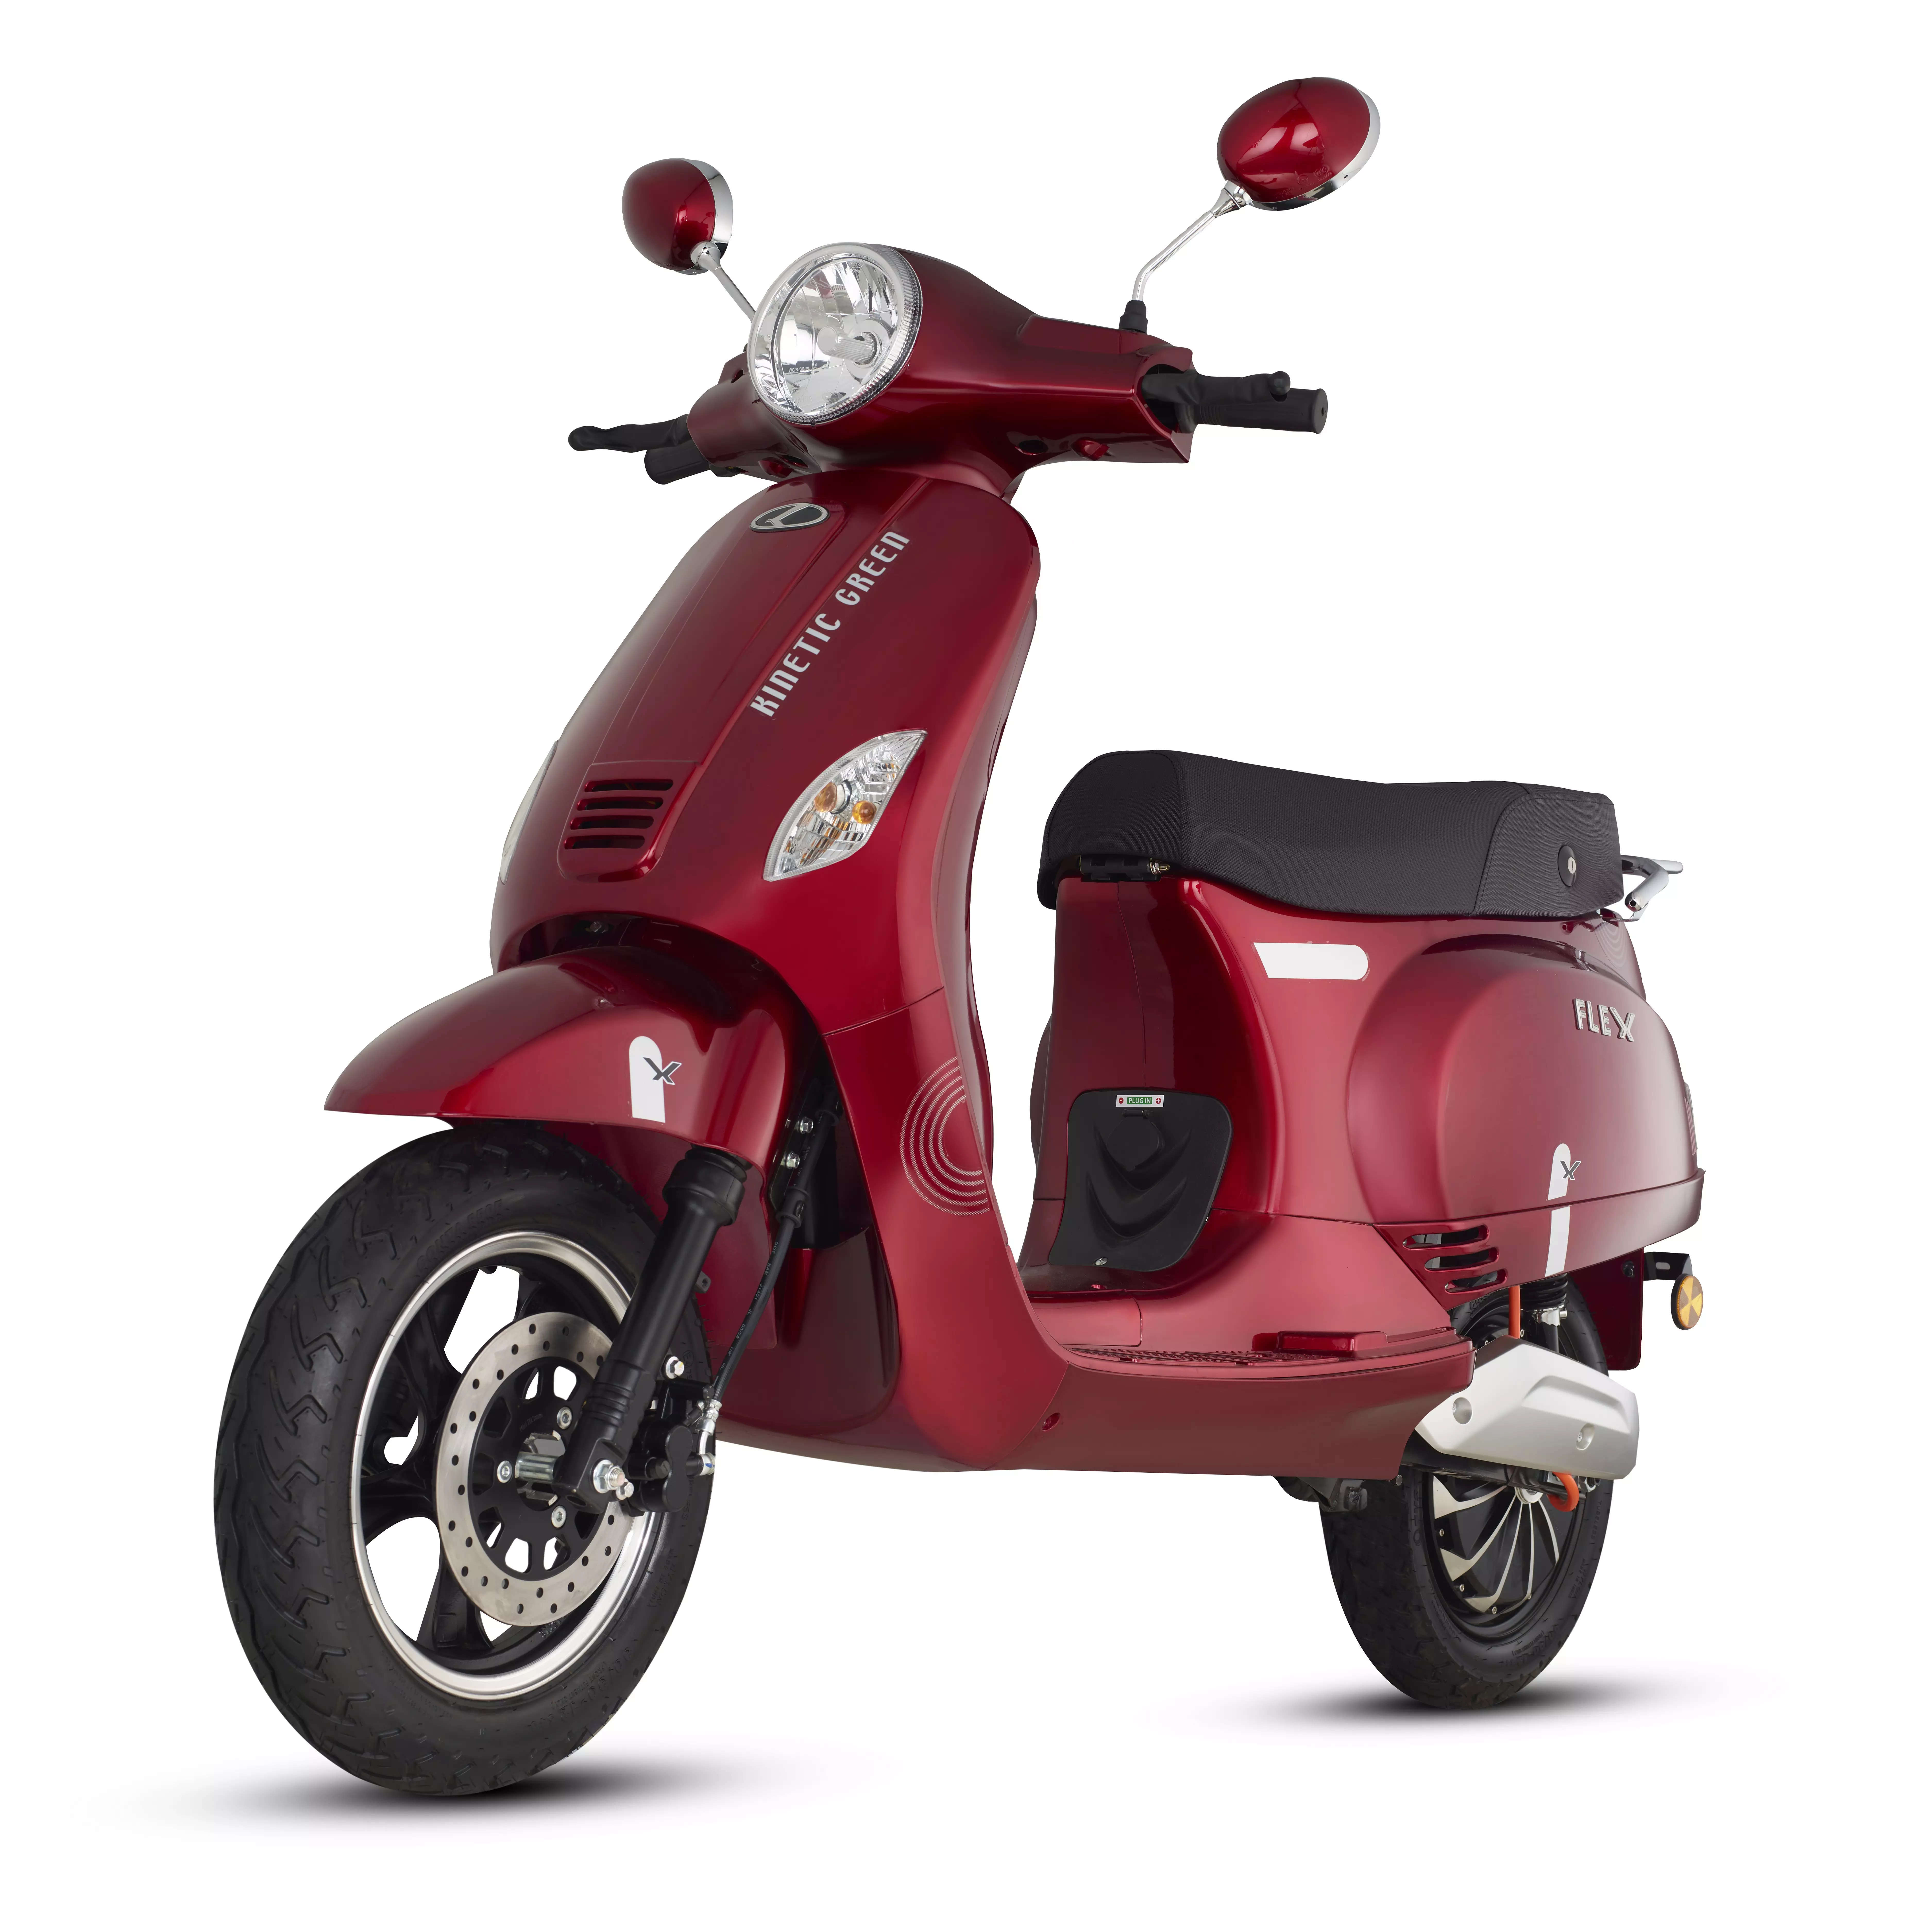 <p>Customers can avail these lucrative financial solutions across Axis Bank’s 4500+ pan – India branches and redeem the benefits at Kinetic Green’s extensive network of 300+ two-wheeler dealerships that is spread across 25 states in the country.</p>